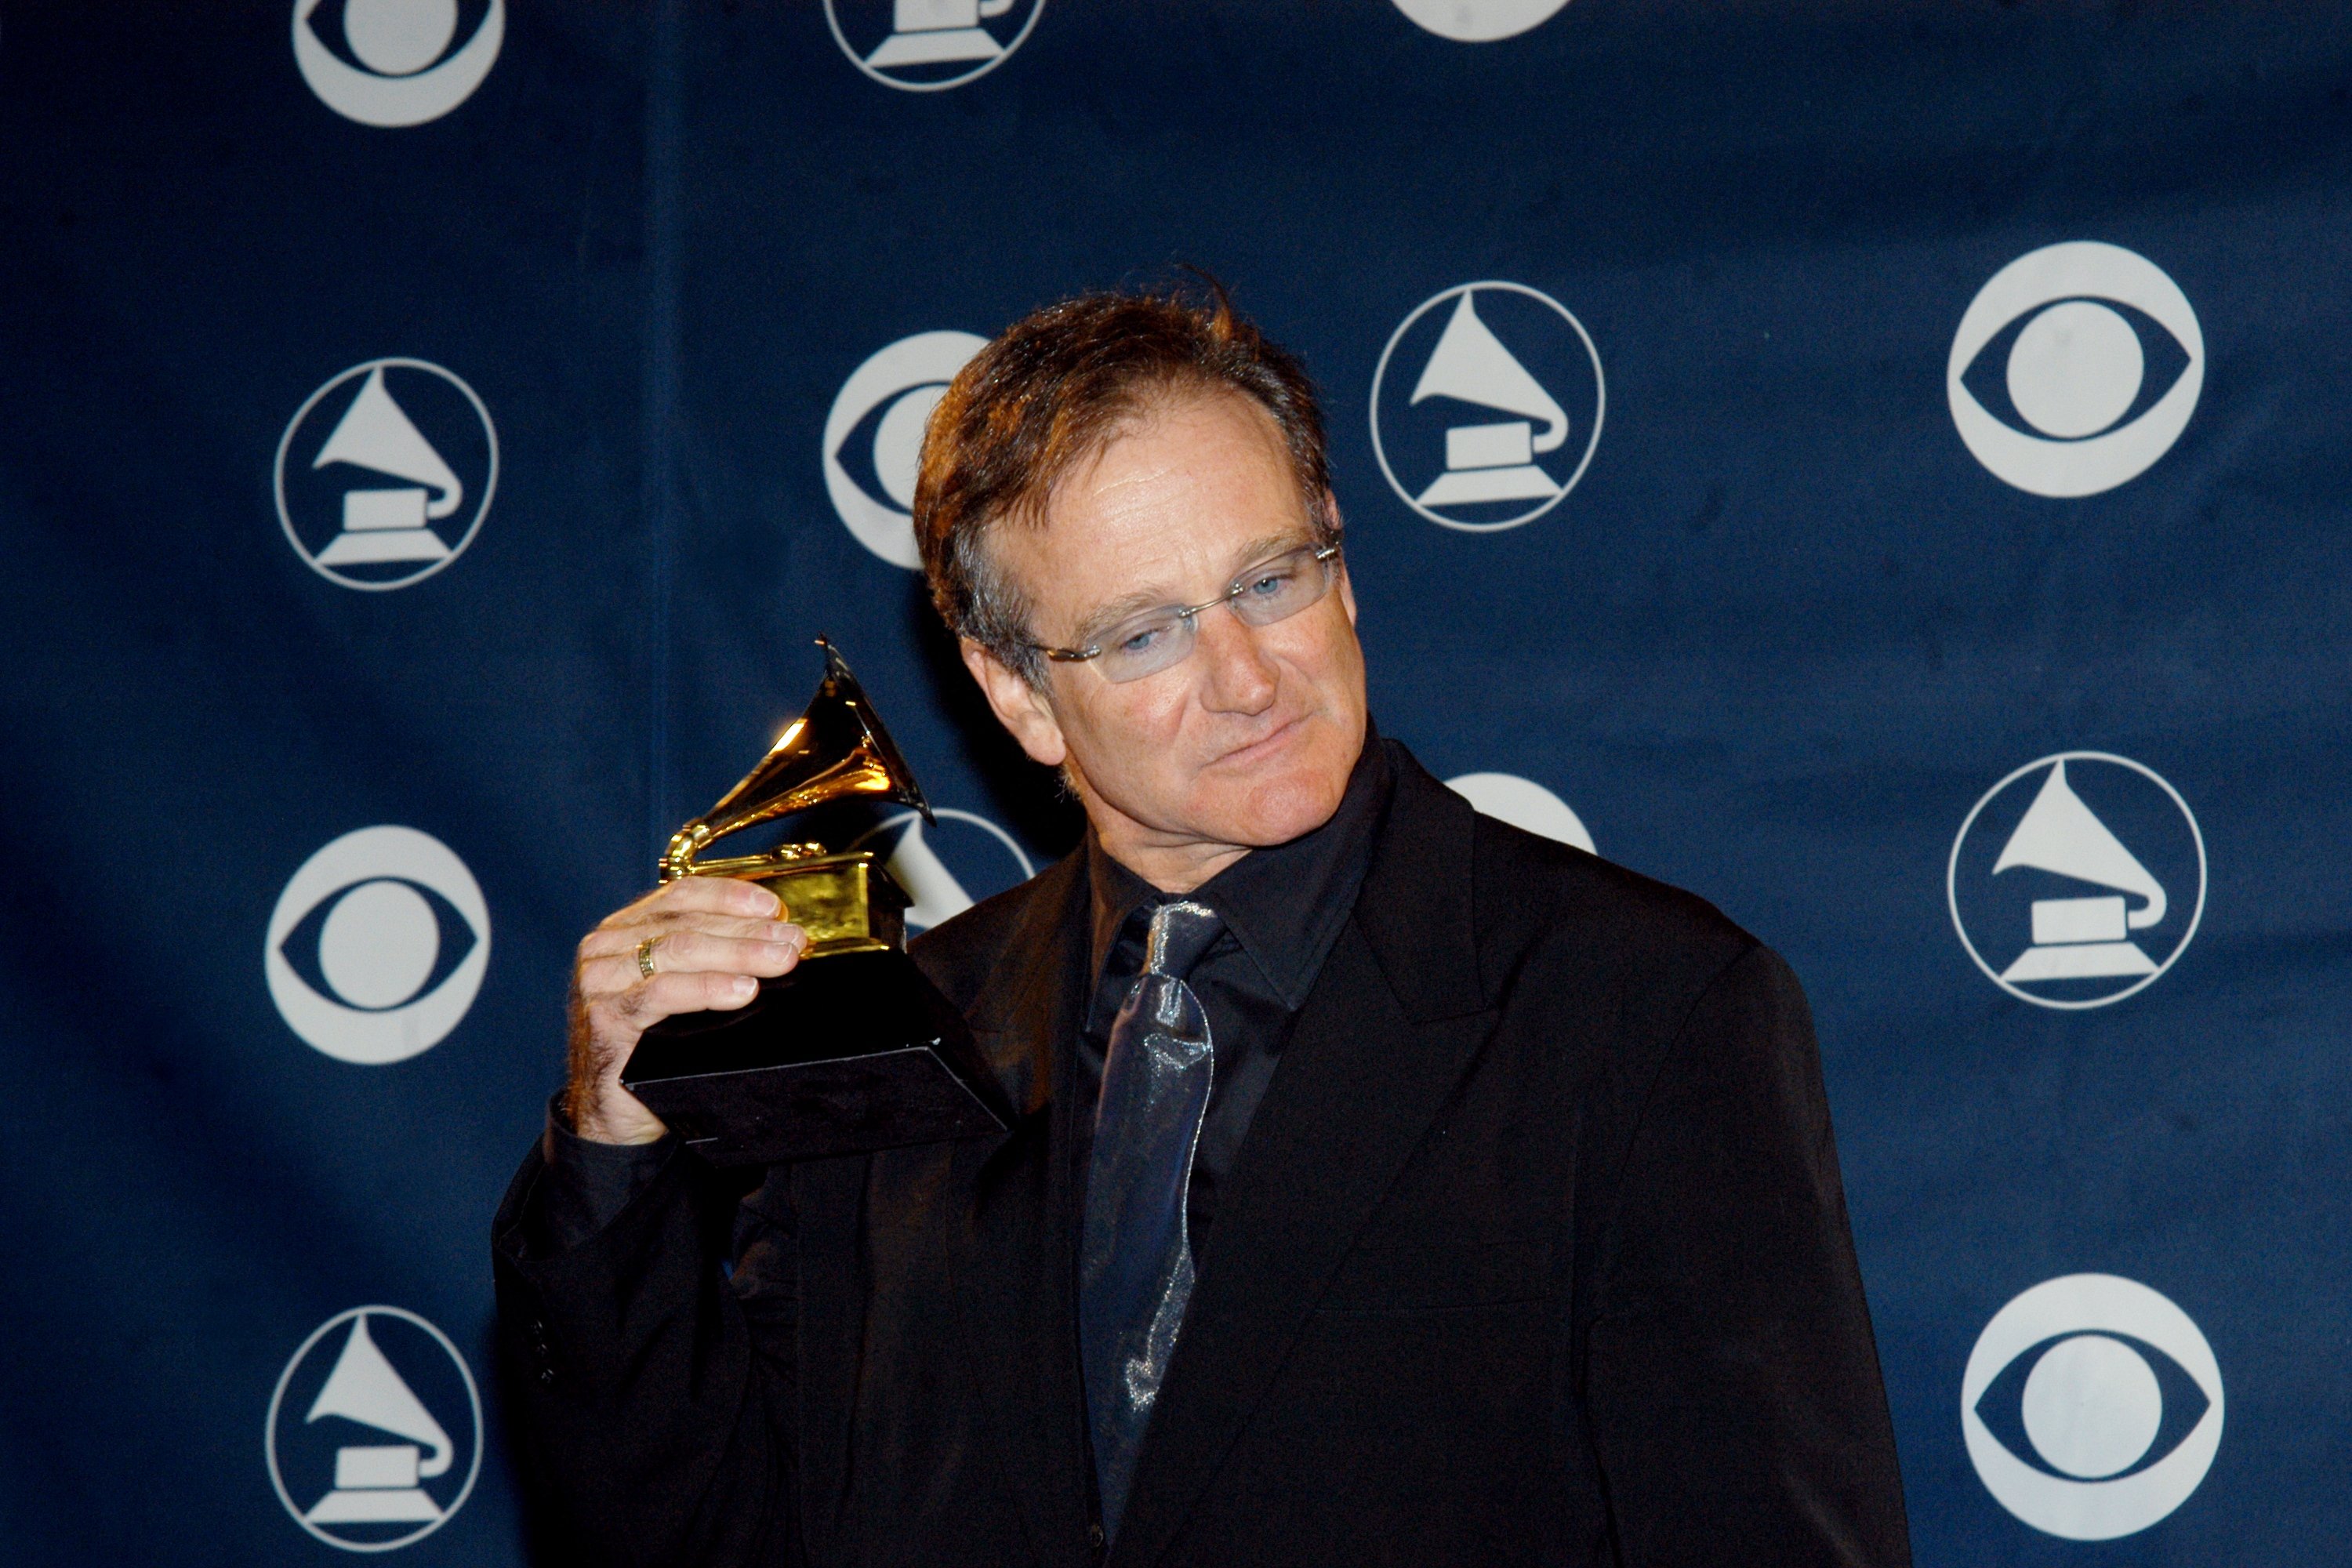 Robin Williams holds his award for Best Spoken Comedy Album backstage at the 45th annual Grammy Awards on February 23, 2003, at Madison Square Garden. | Source: Getty Images